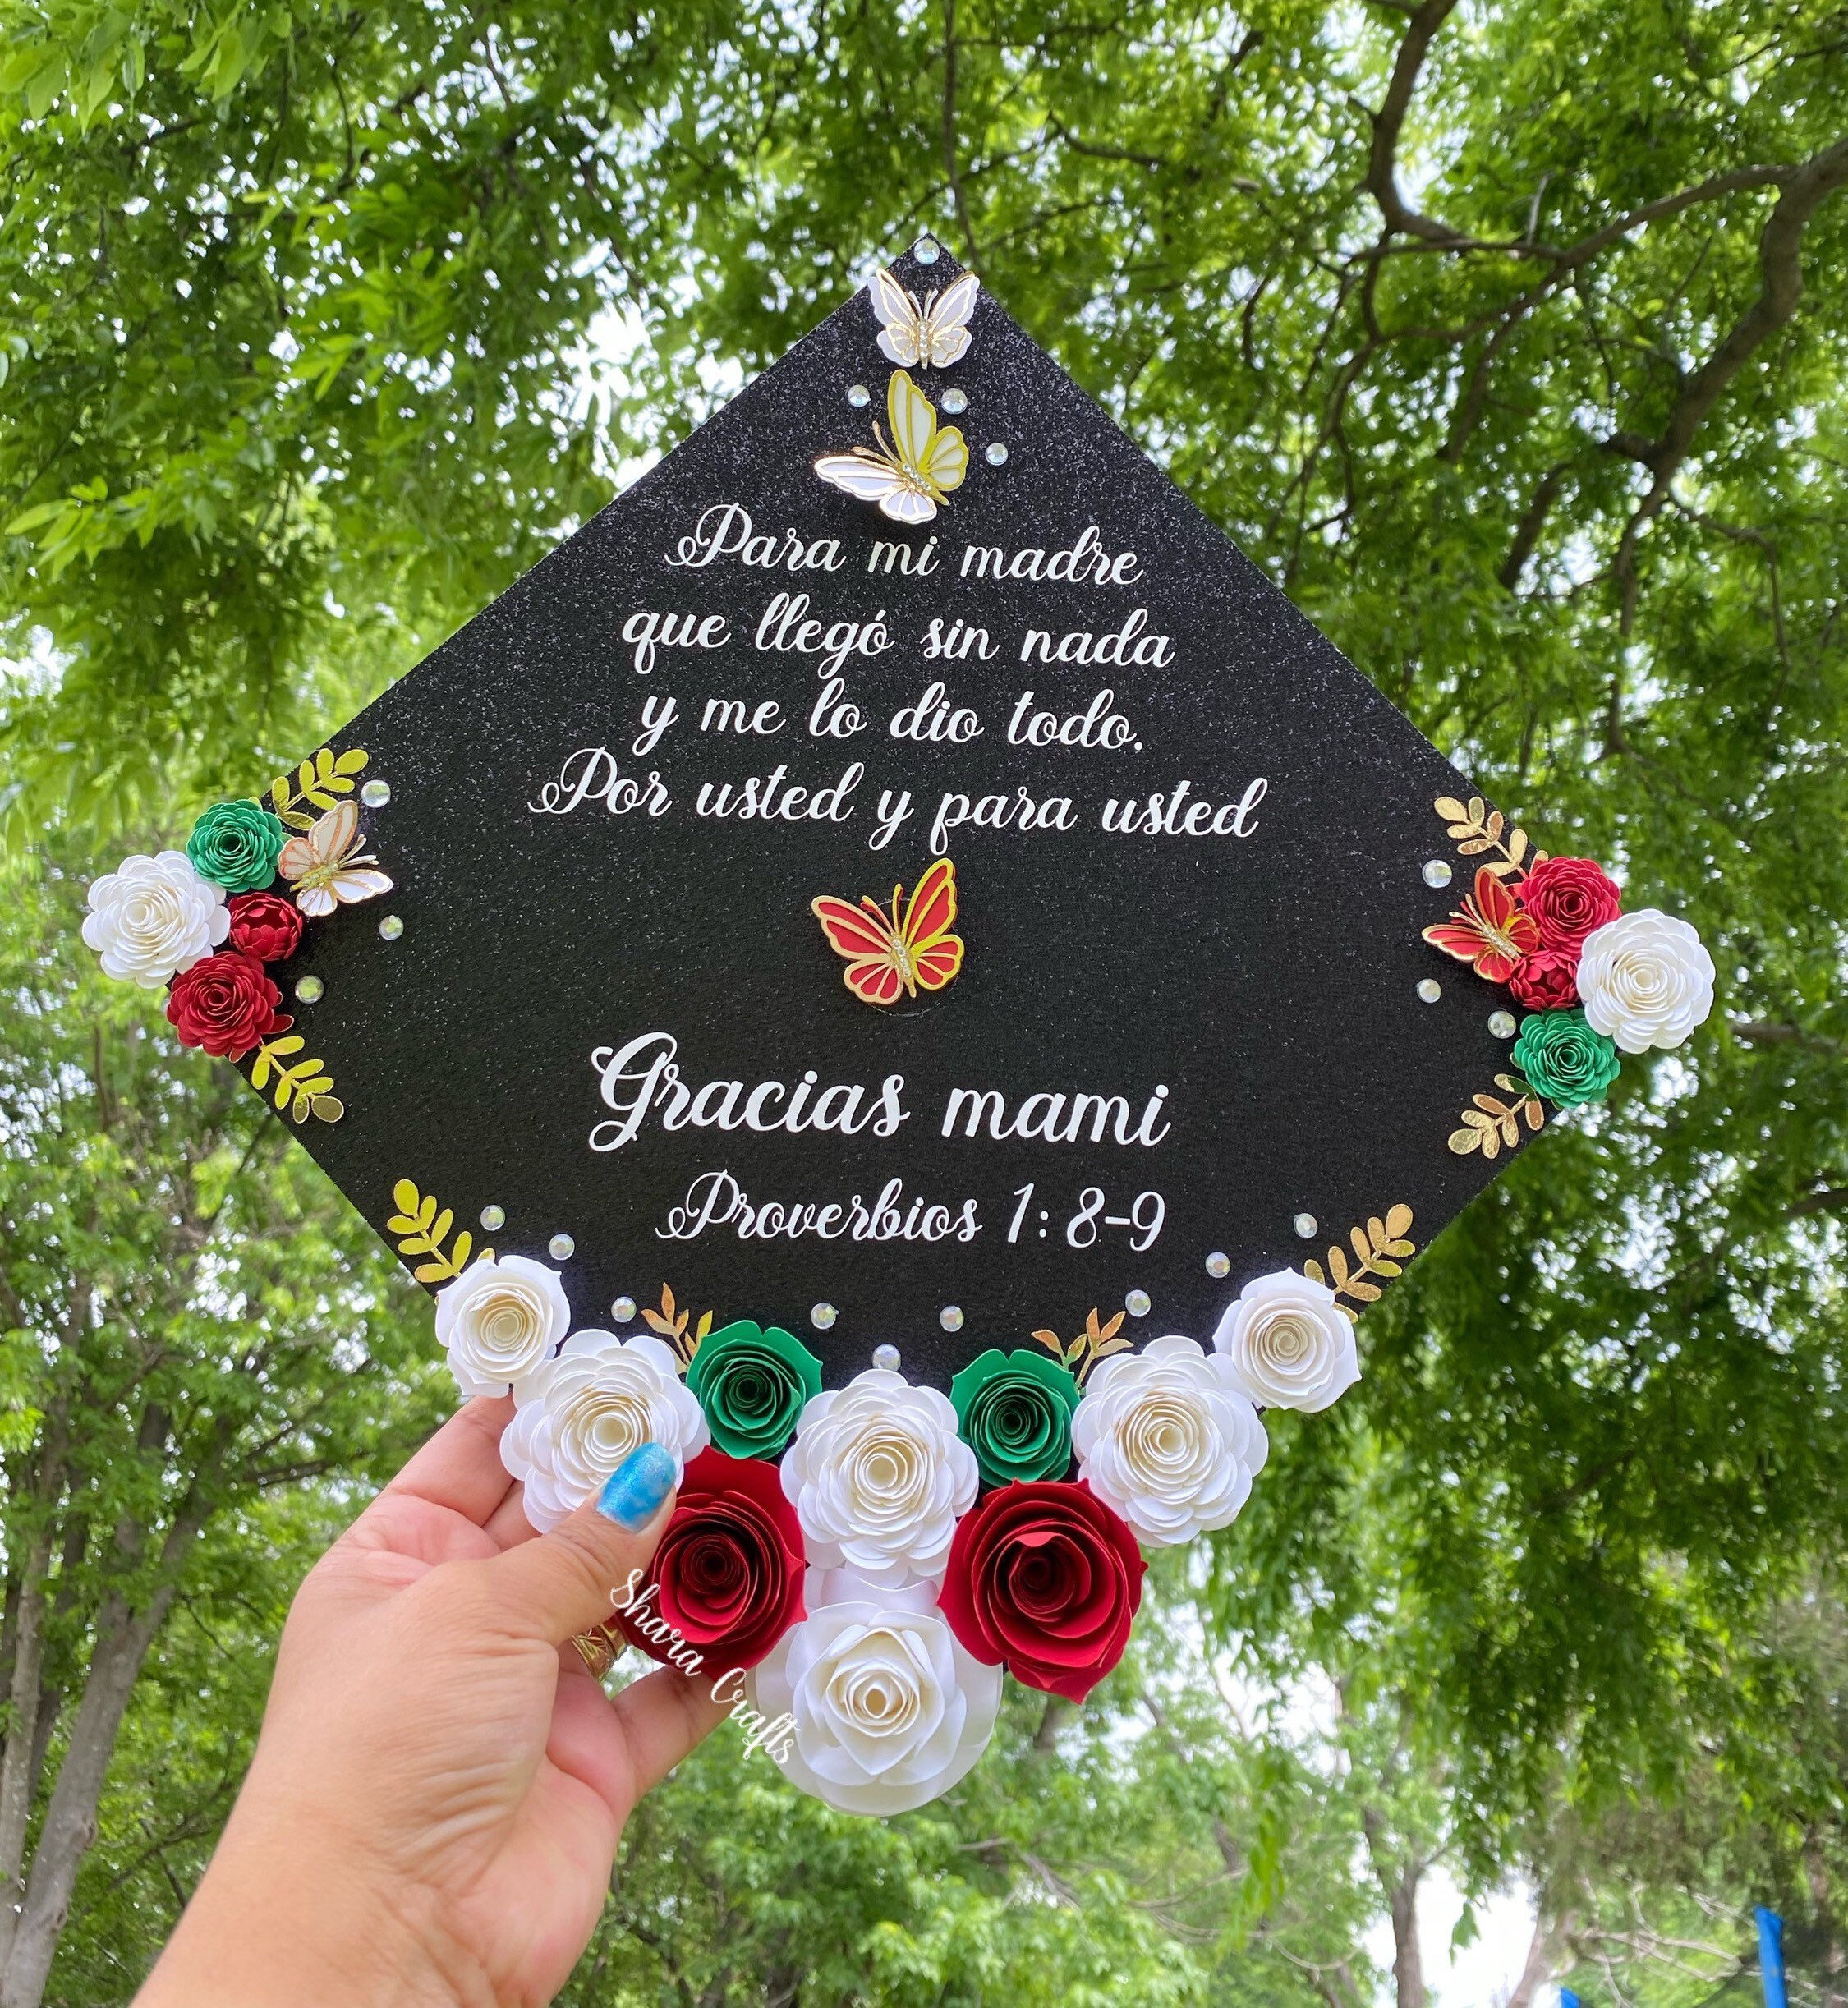 Hats Off to Decorated Graduation Caps Dollar Tree Style!